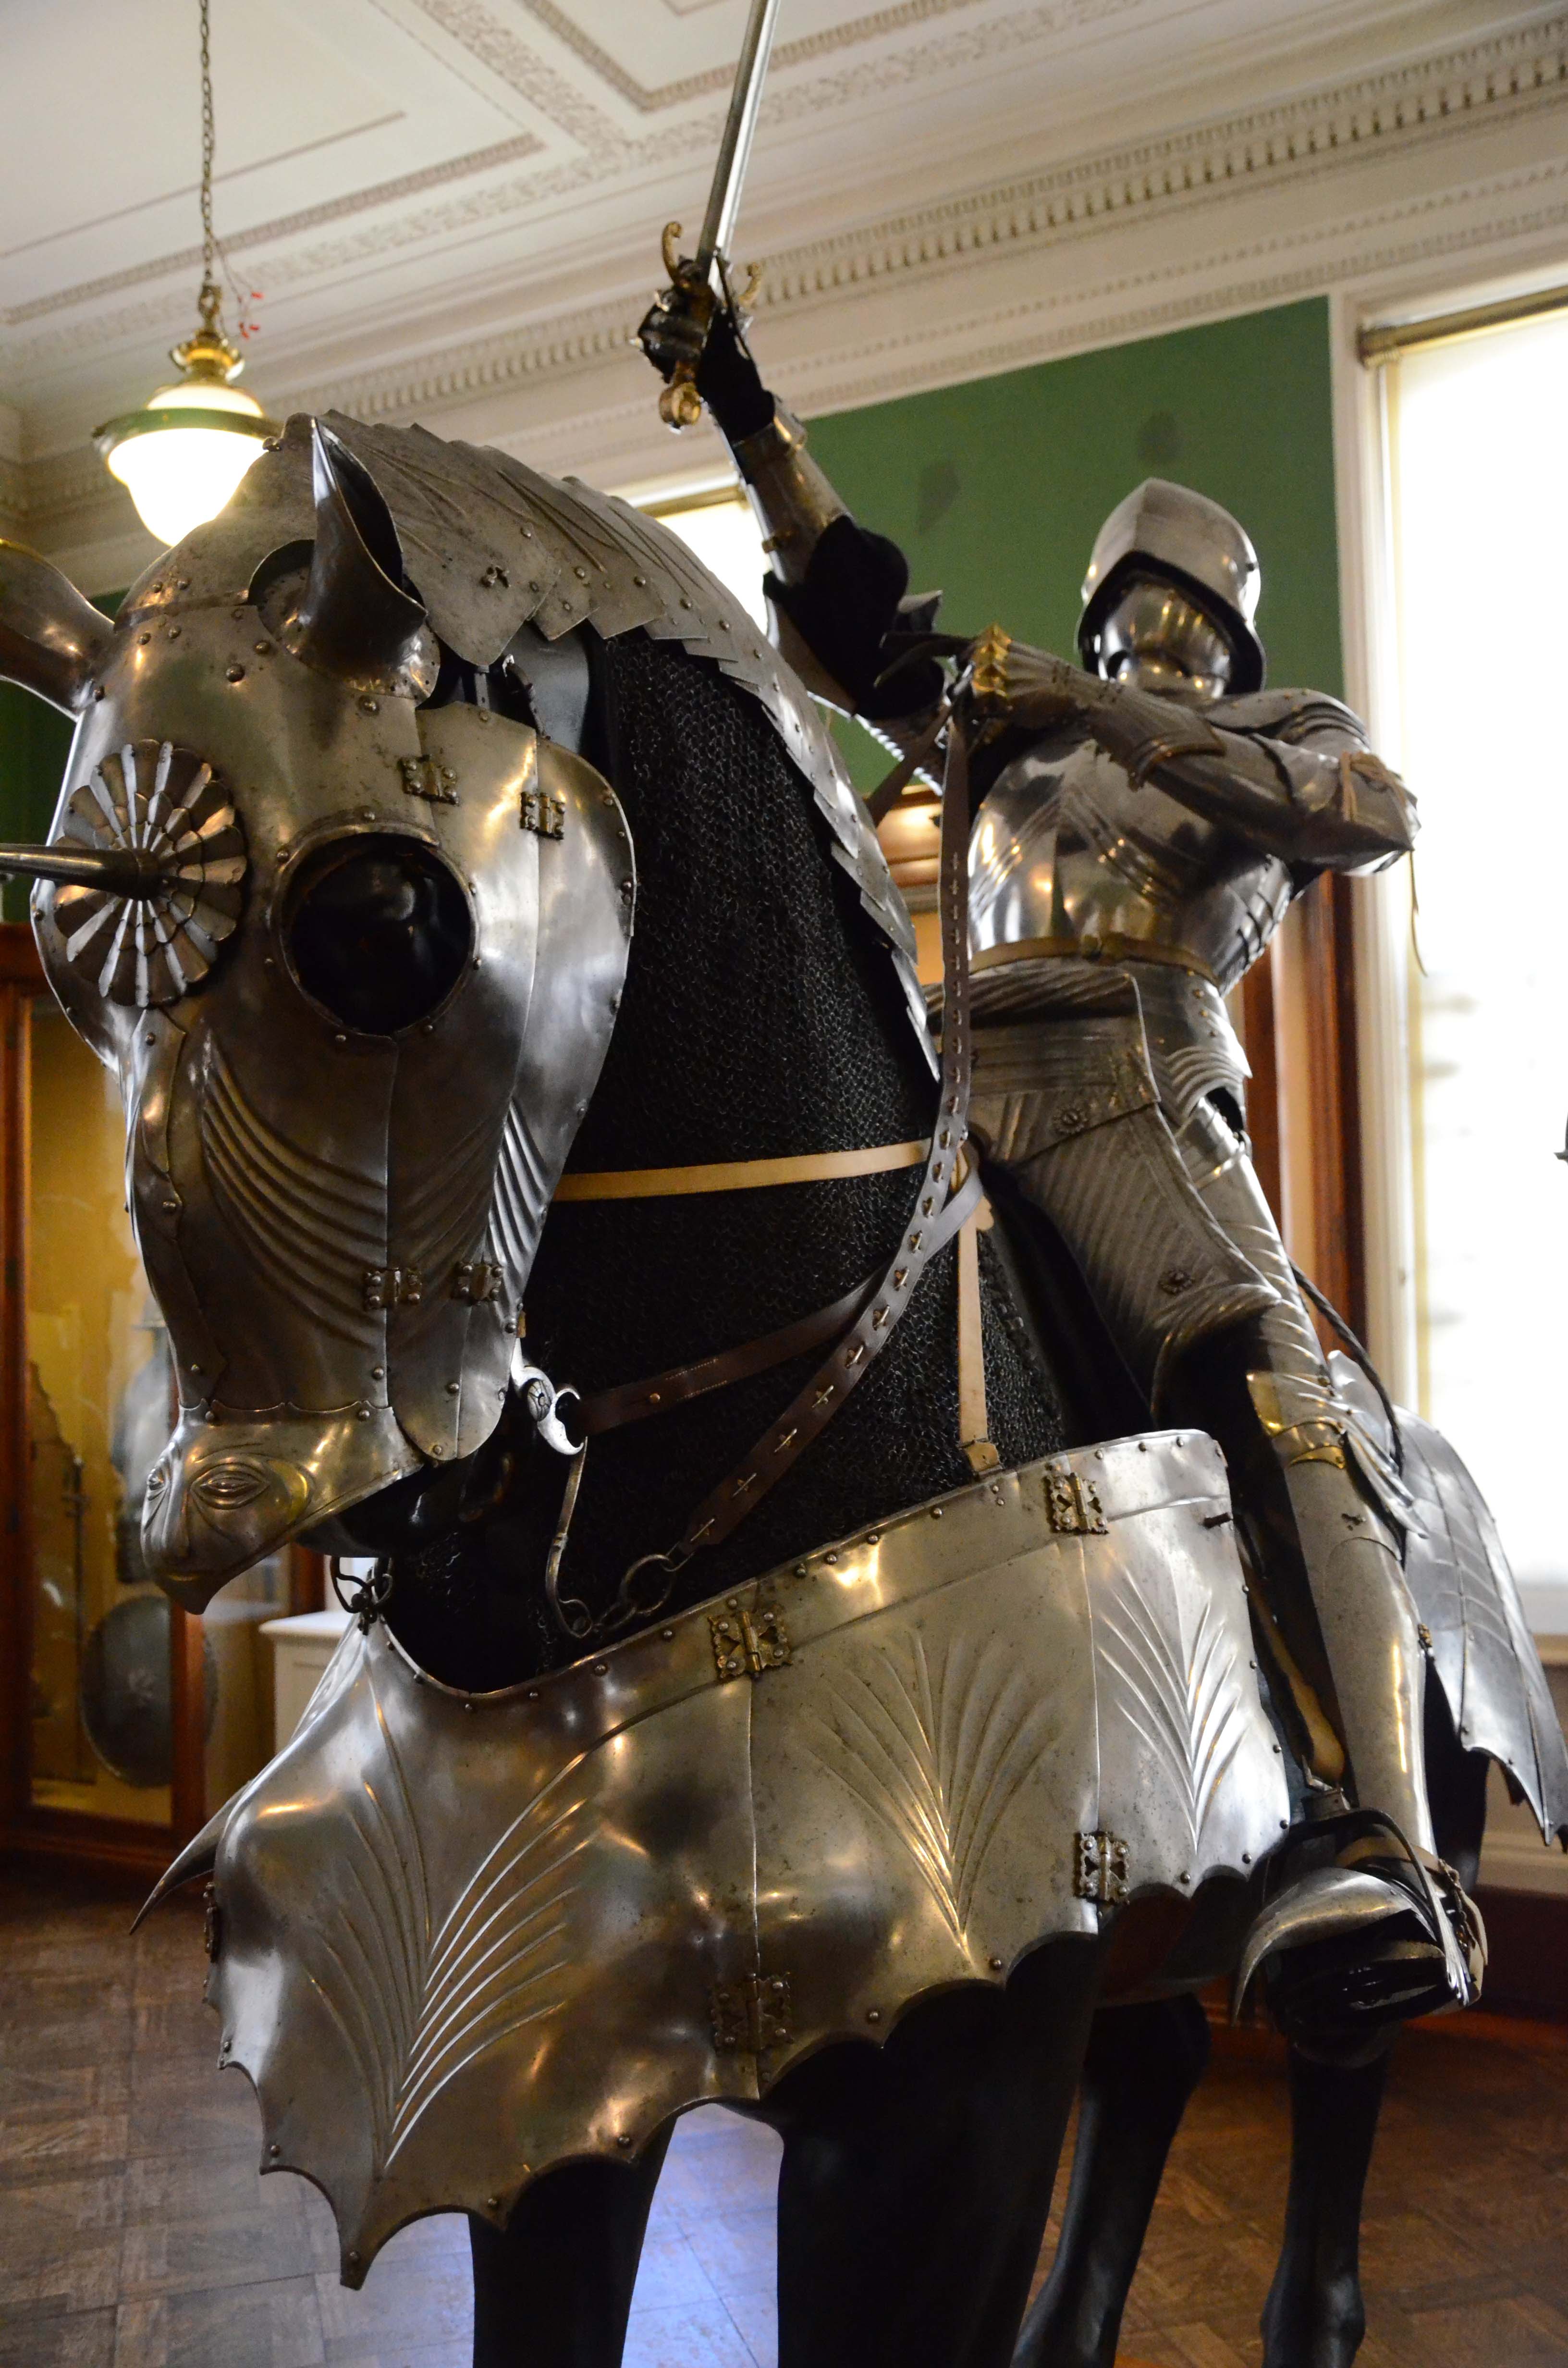 [Image: knight-and-horse.jpg]